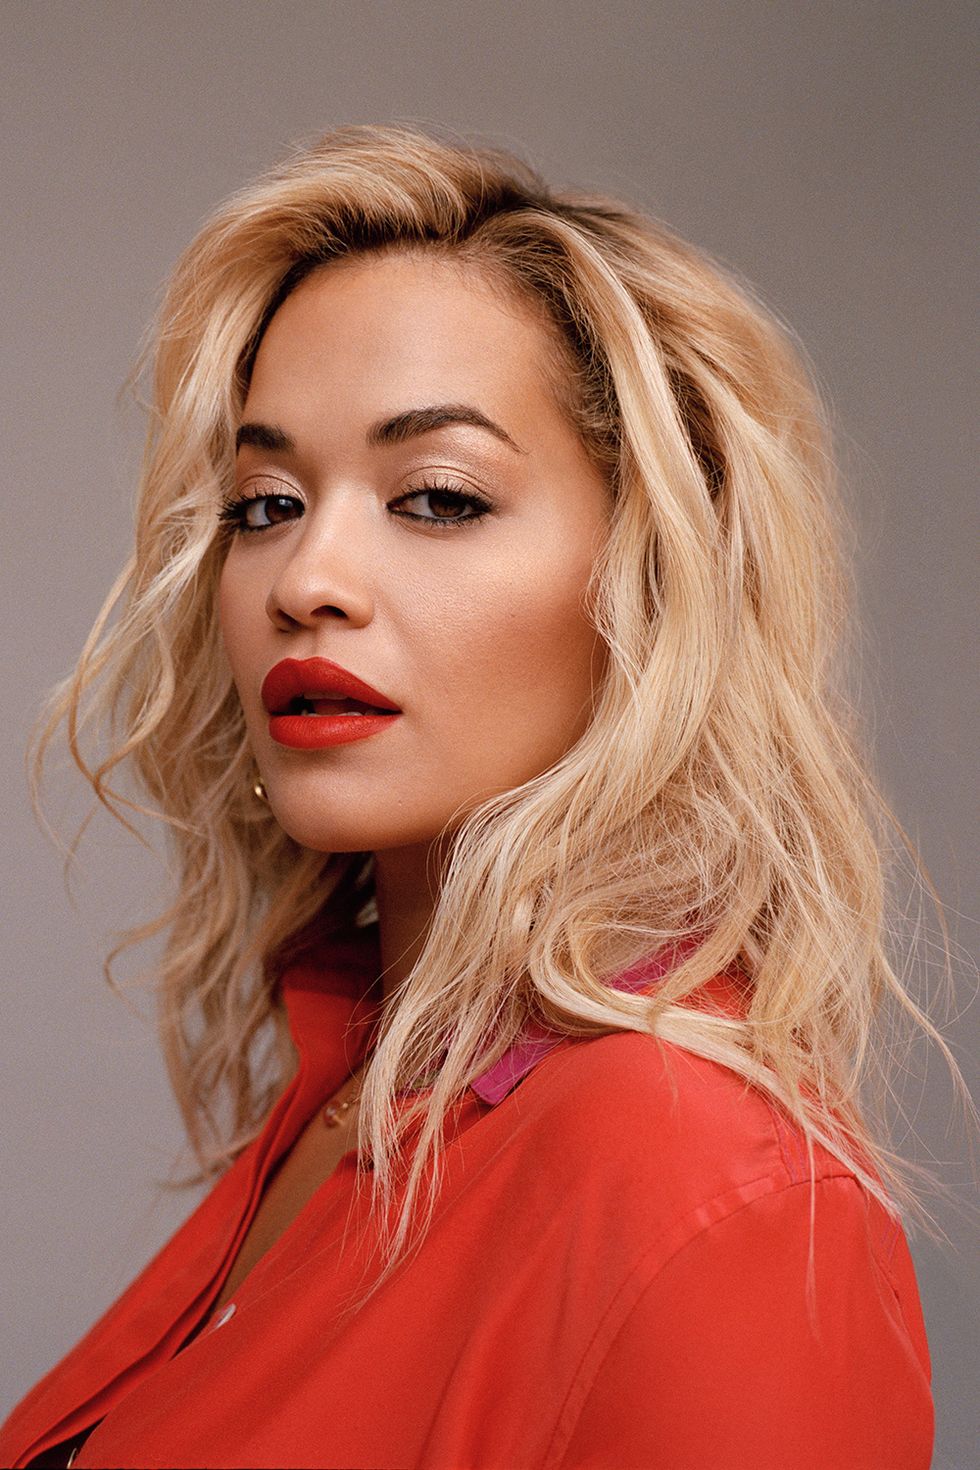 Rita Ora for Rimmel's I Will Not Be Deleted campaign